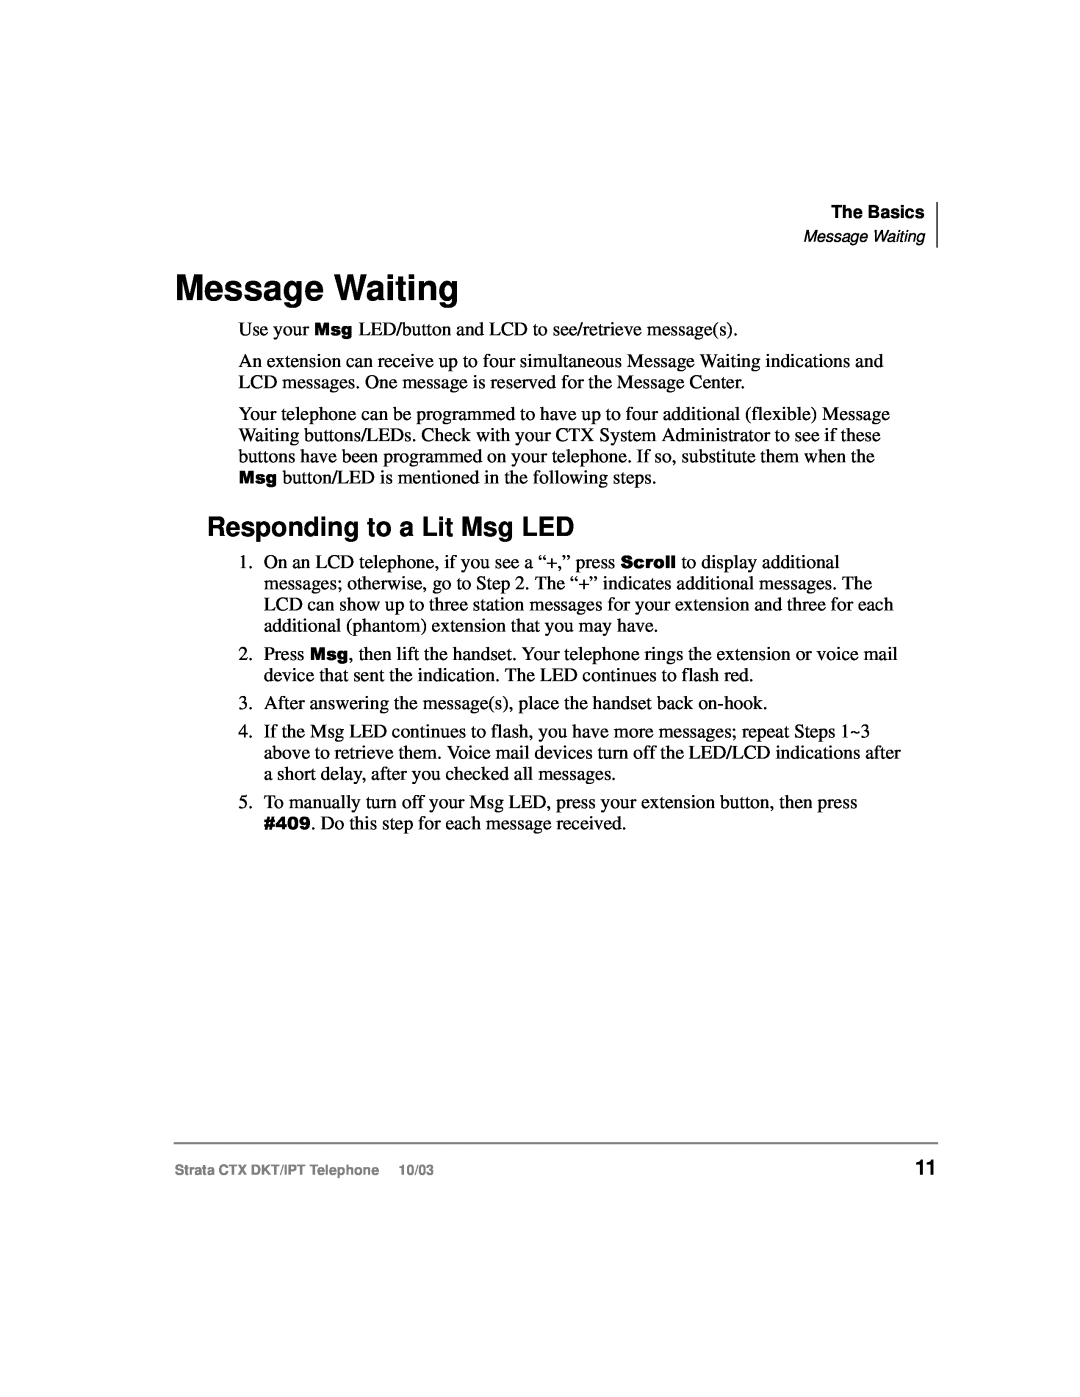 Toshiba DKT, IPT manual Message Waiting, Responding to a Lit Msg LED 